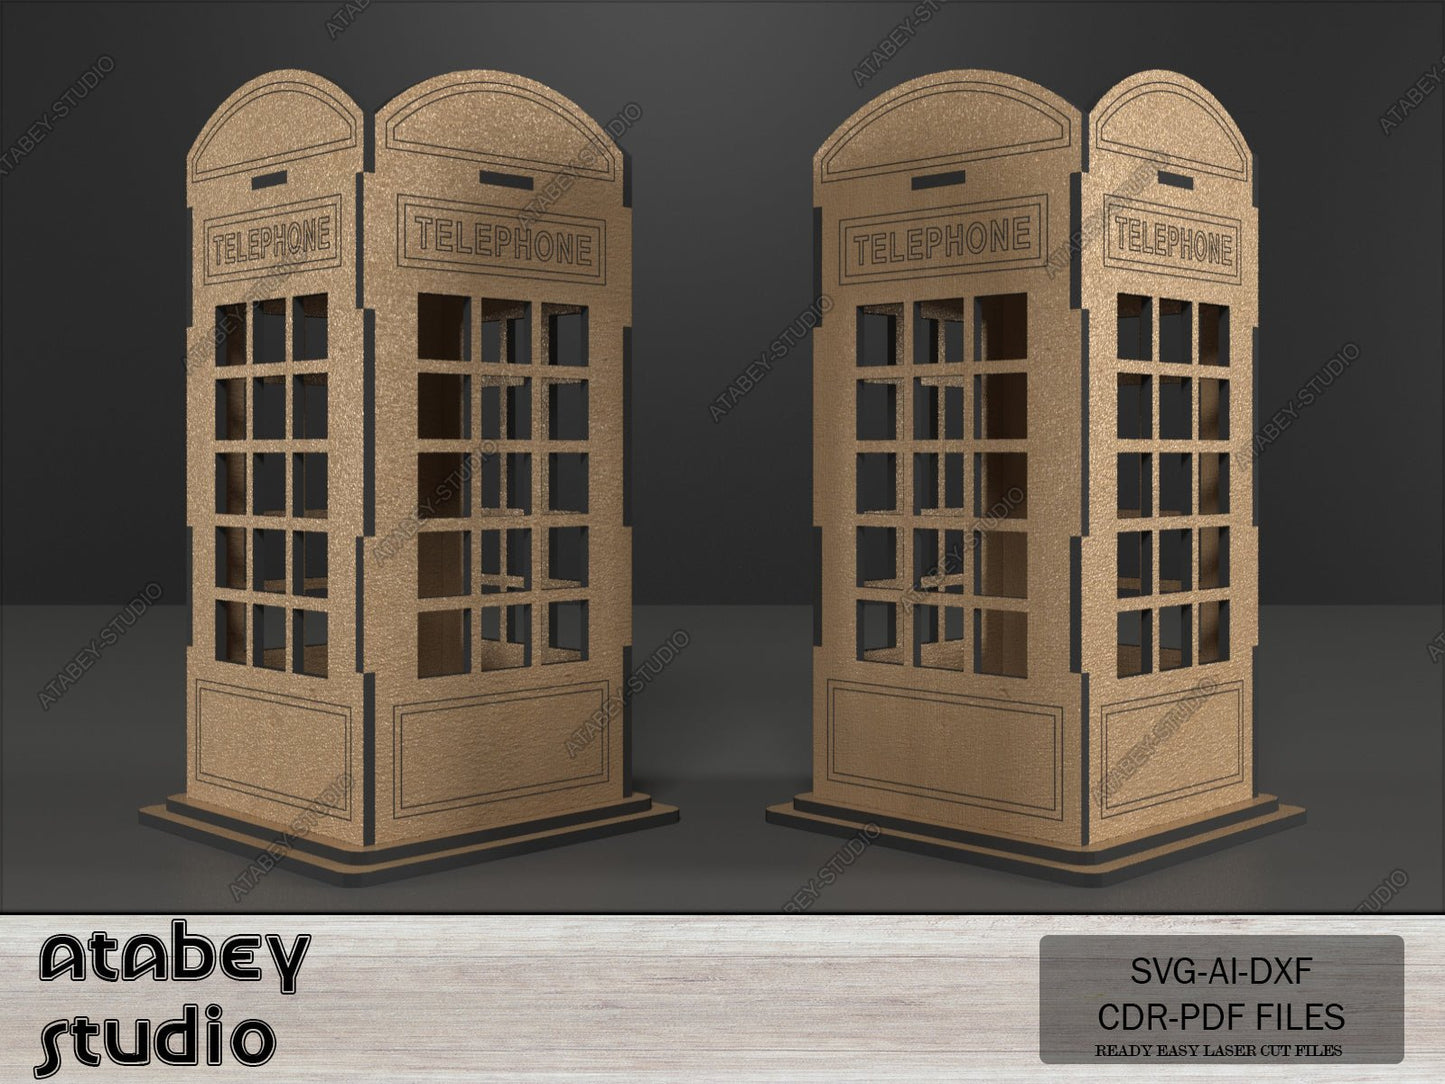 British London Phone Booth Tea Light holder - English Telephone Lantern Candle Holder - Wooden Vector Cut Files Svg Dxf Cdr Ai 569